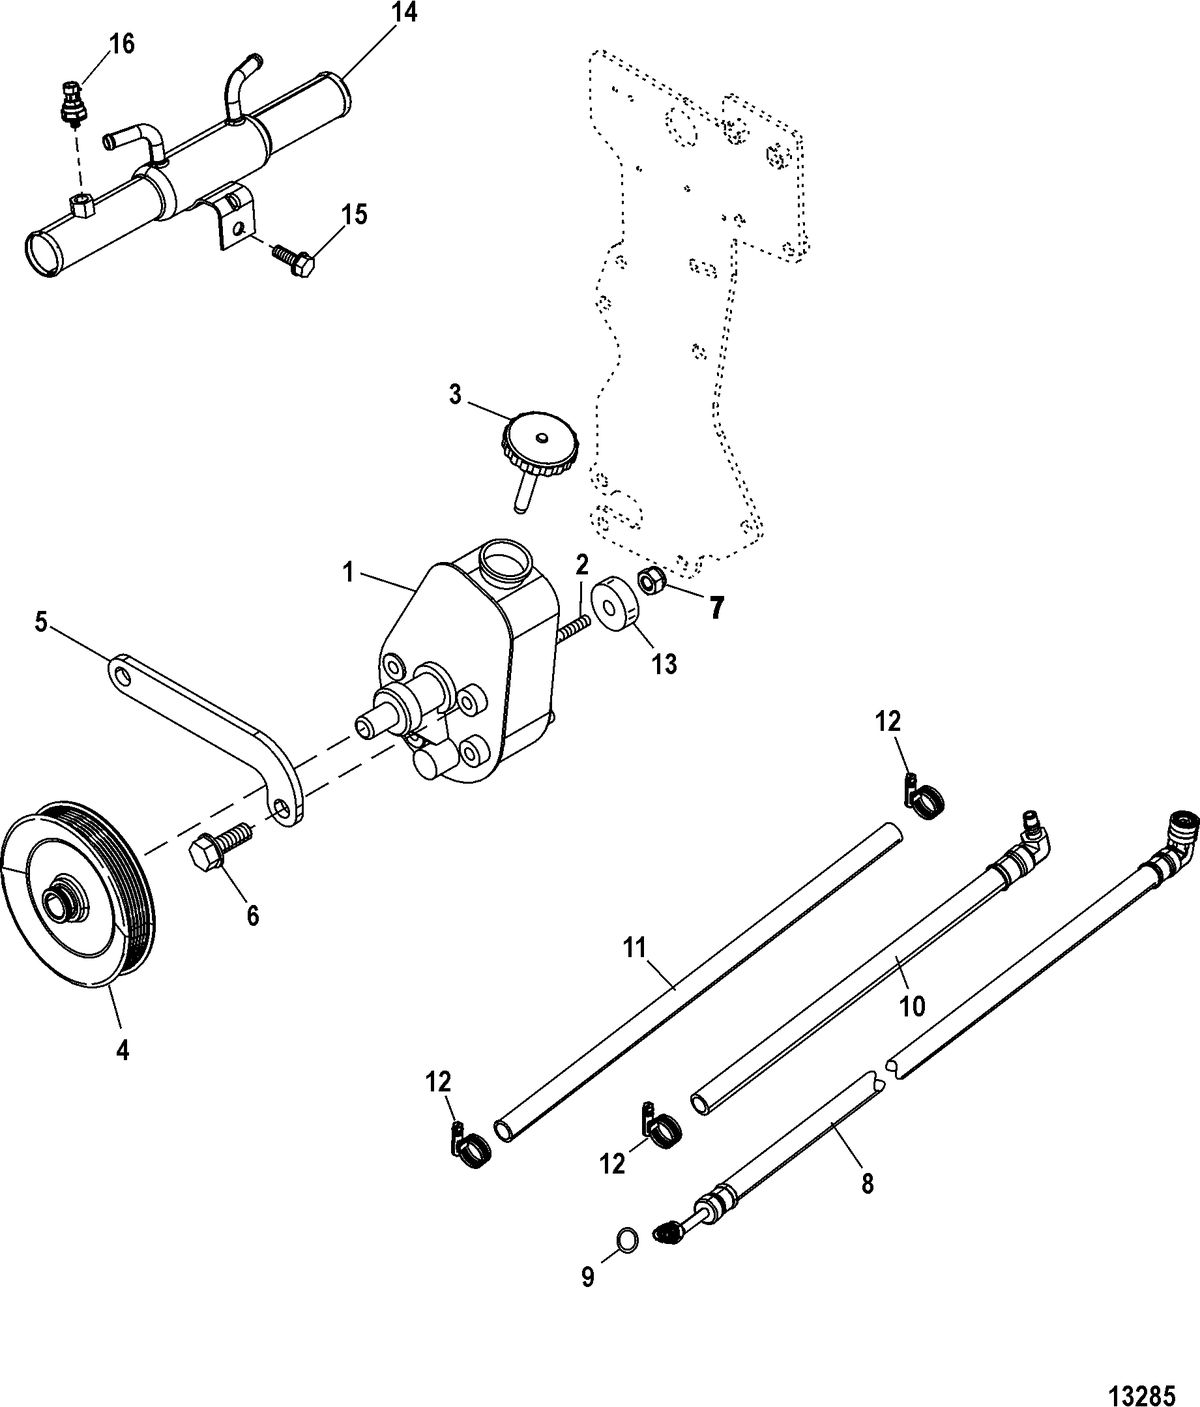 MERCRUISER MPI STERNDRIVE Power Steering Components